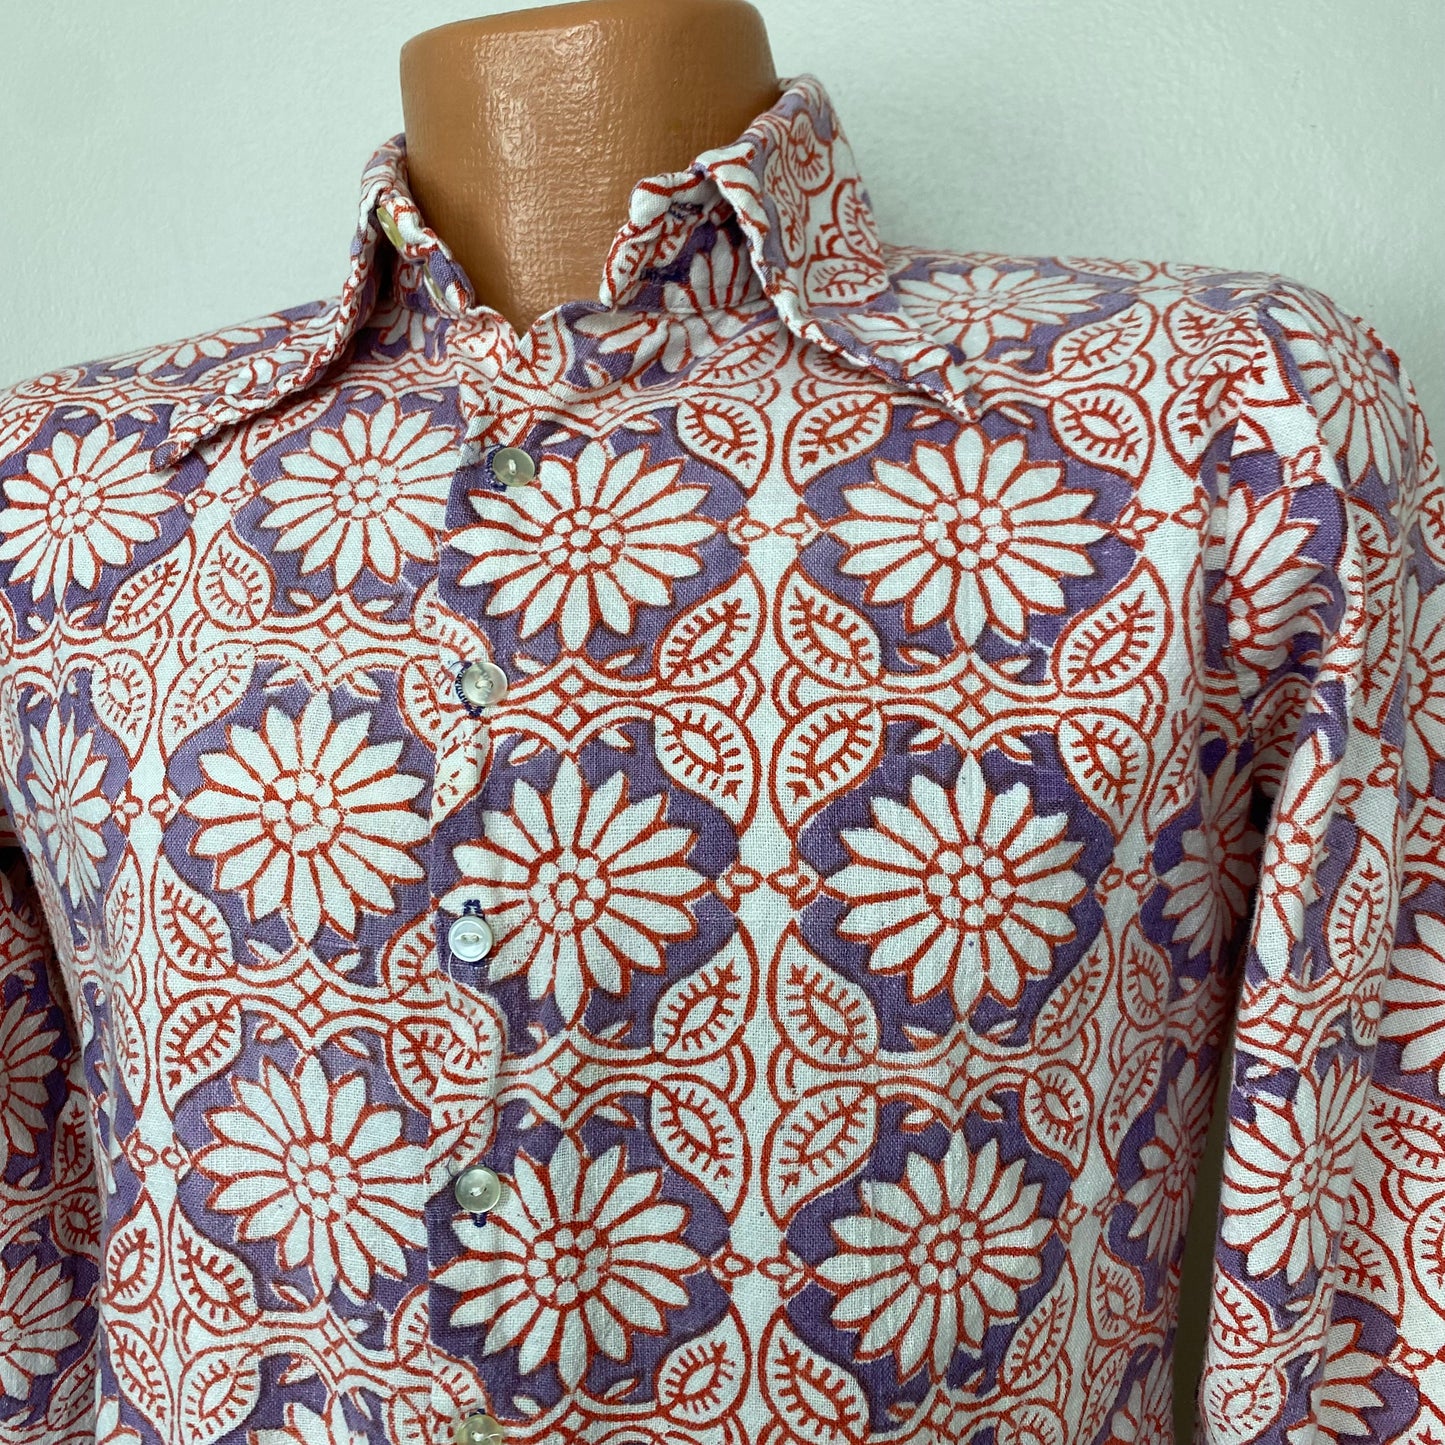 1960s/70s Hand Printed Floral Collared Shirt, Size S/M